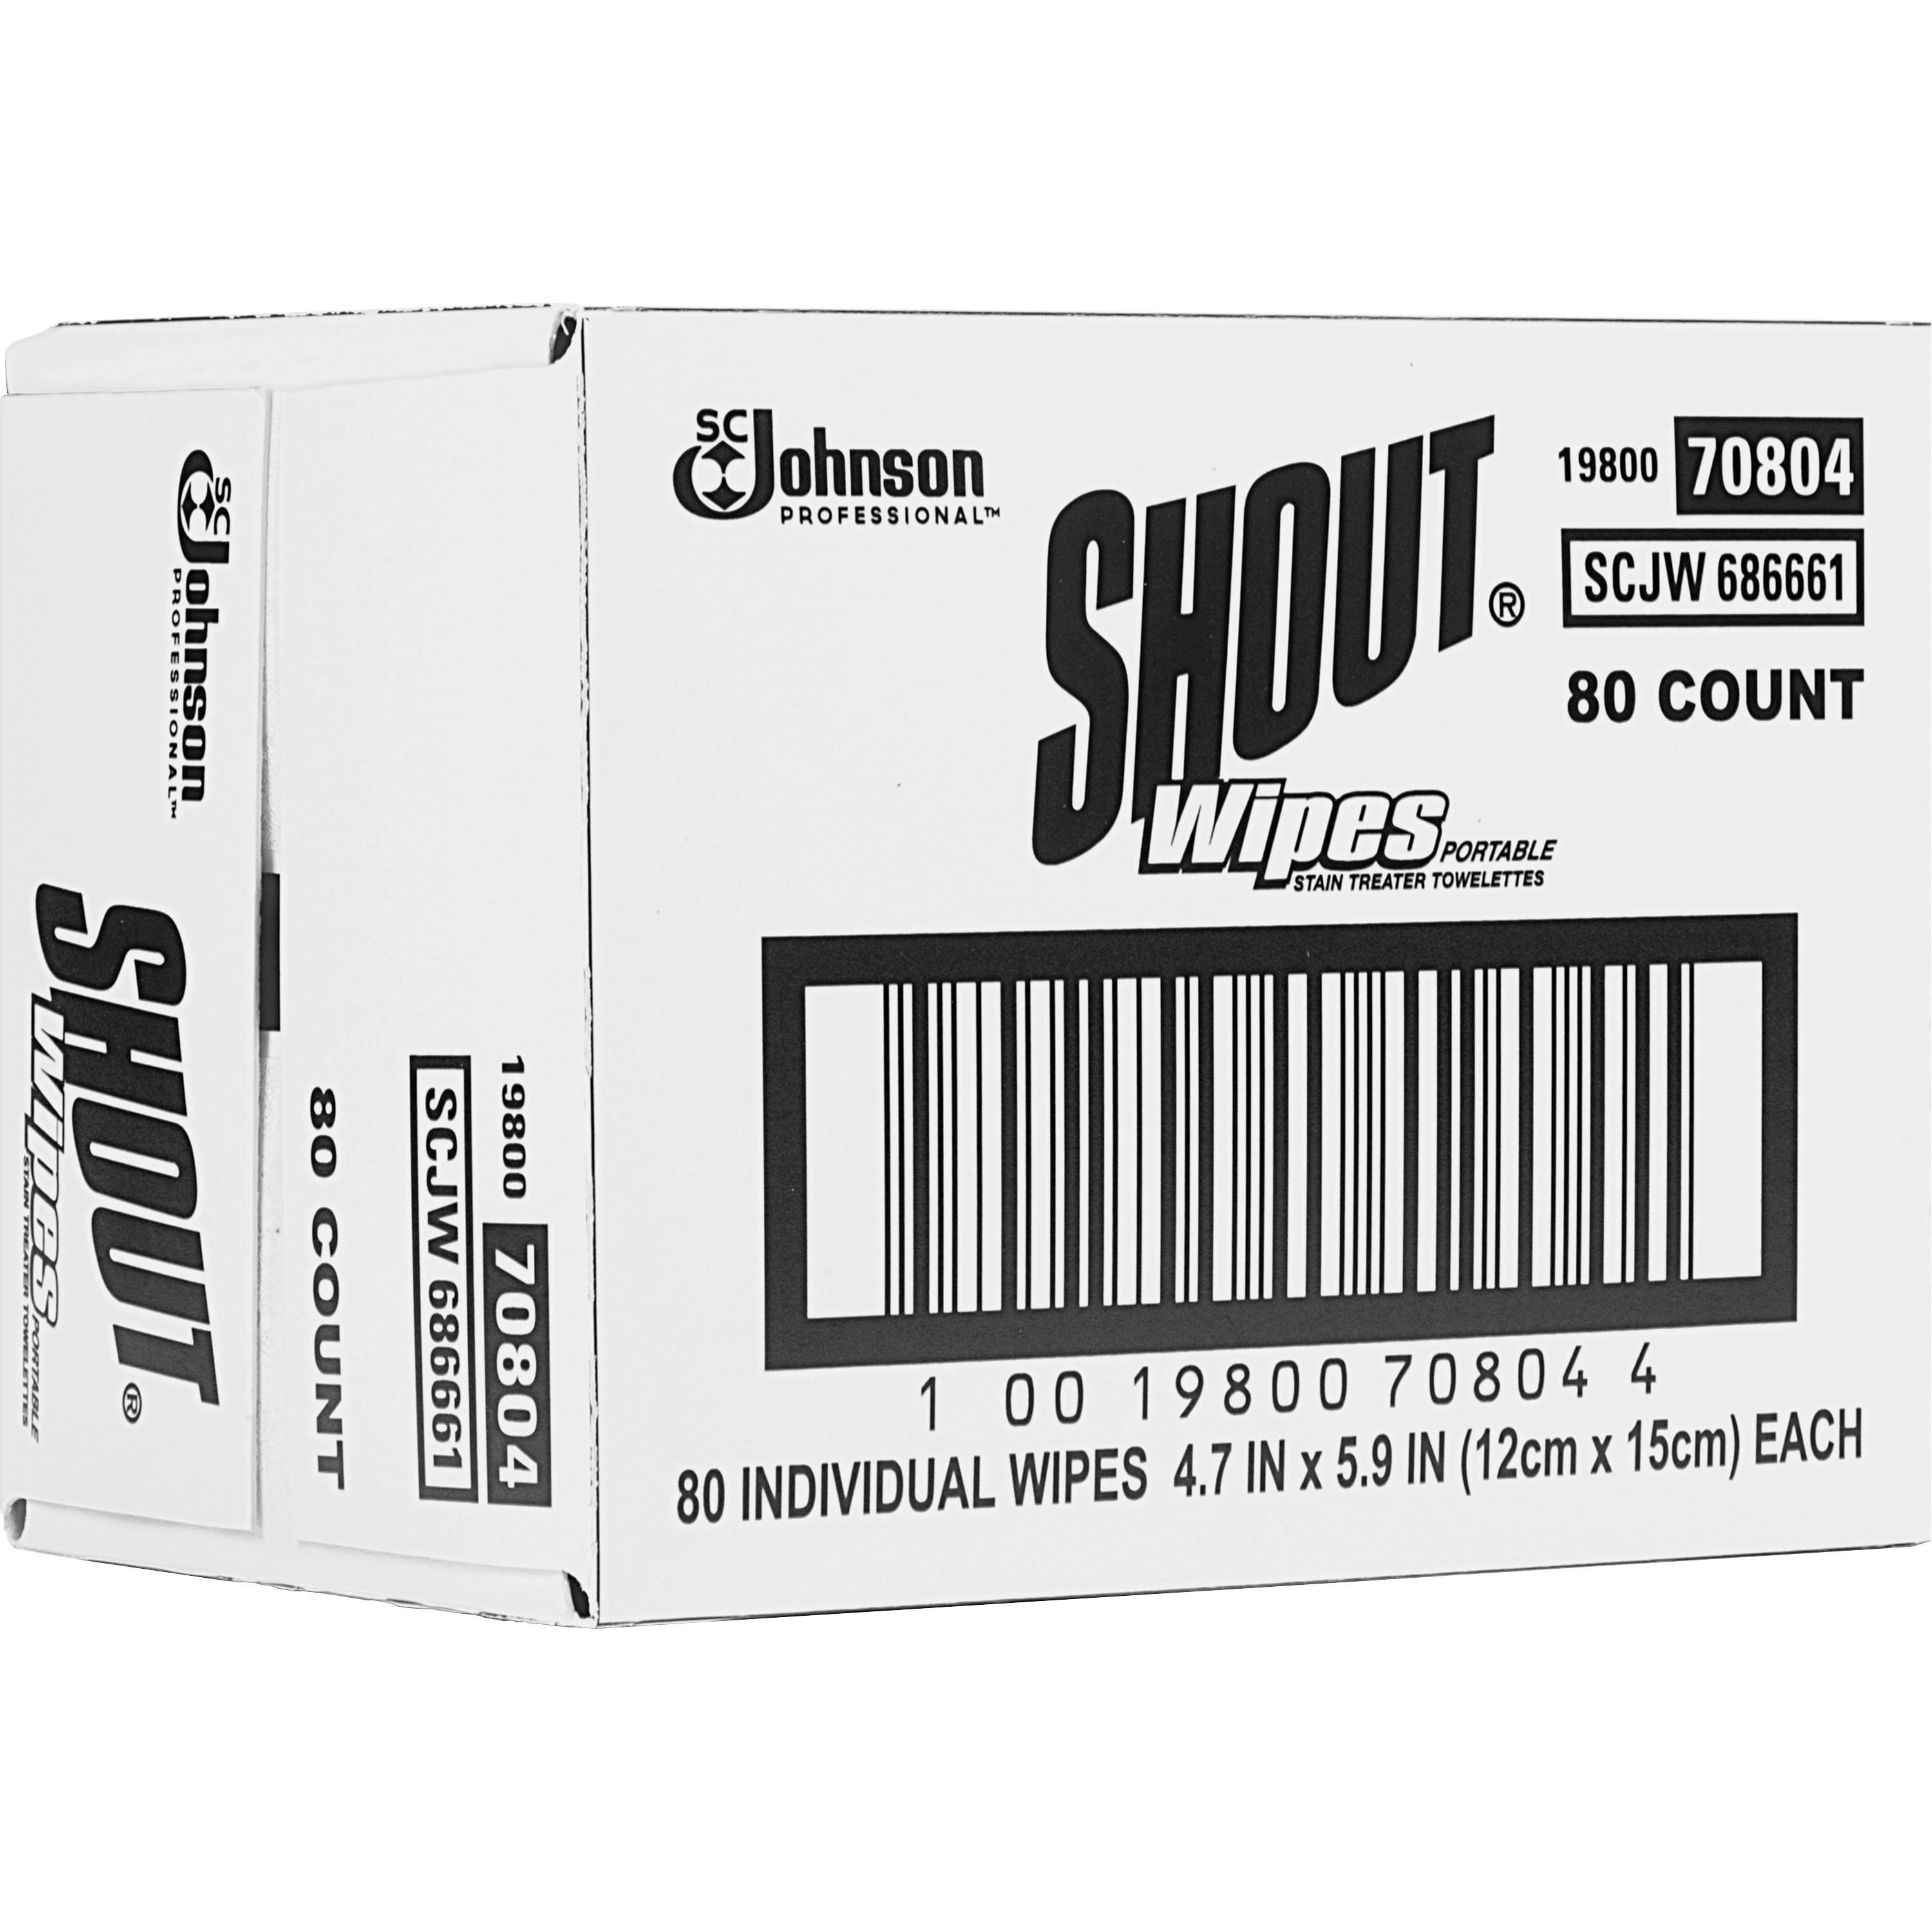  Shout Wipe & Go Instant Stain Remover - 12 CT : Health &  Household